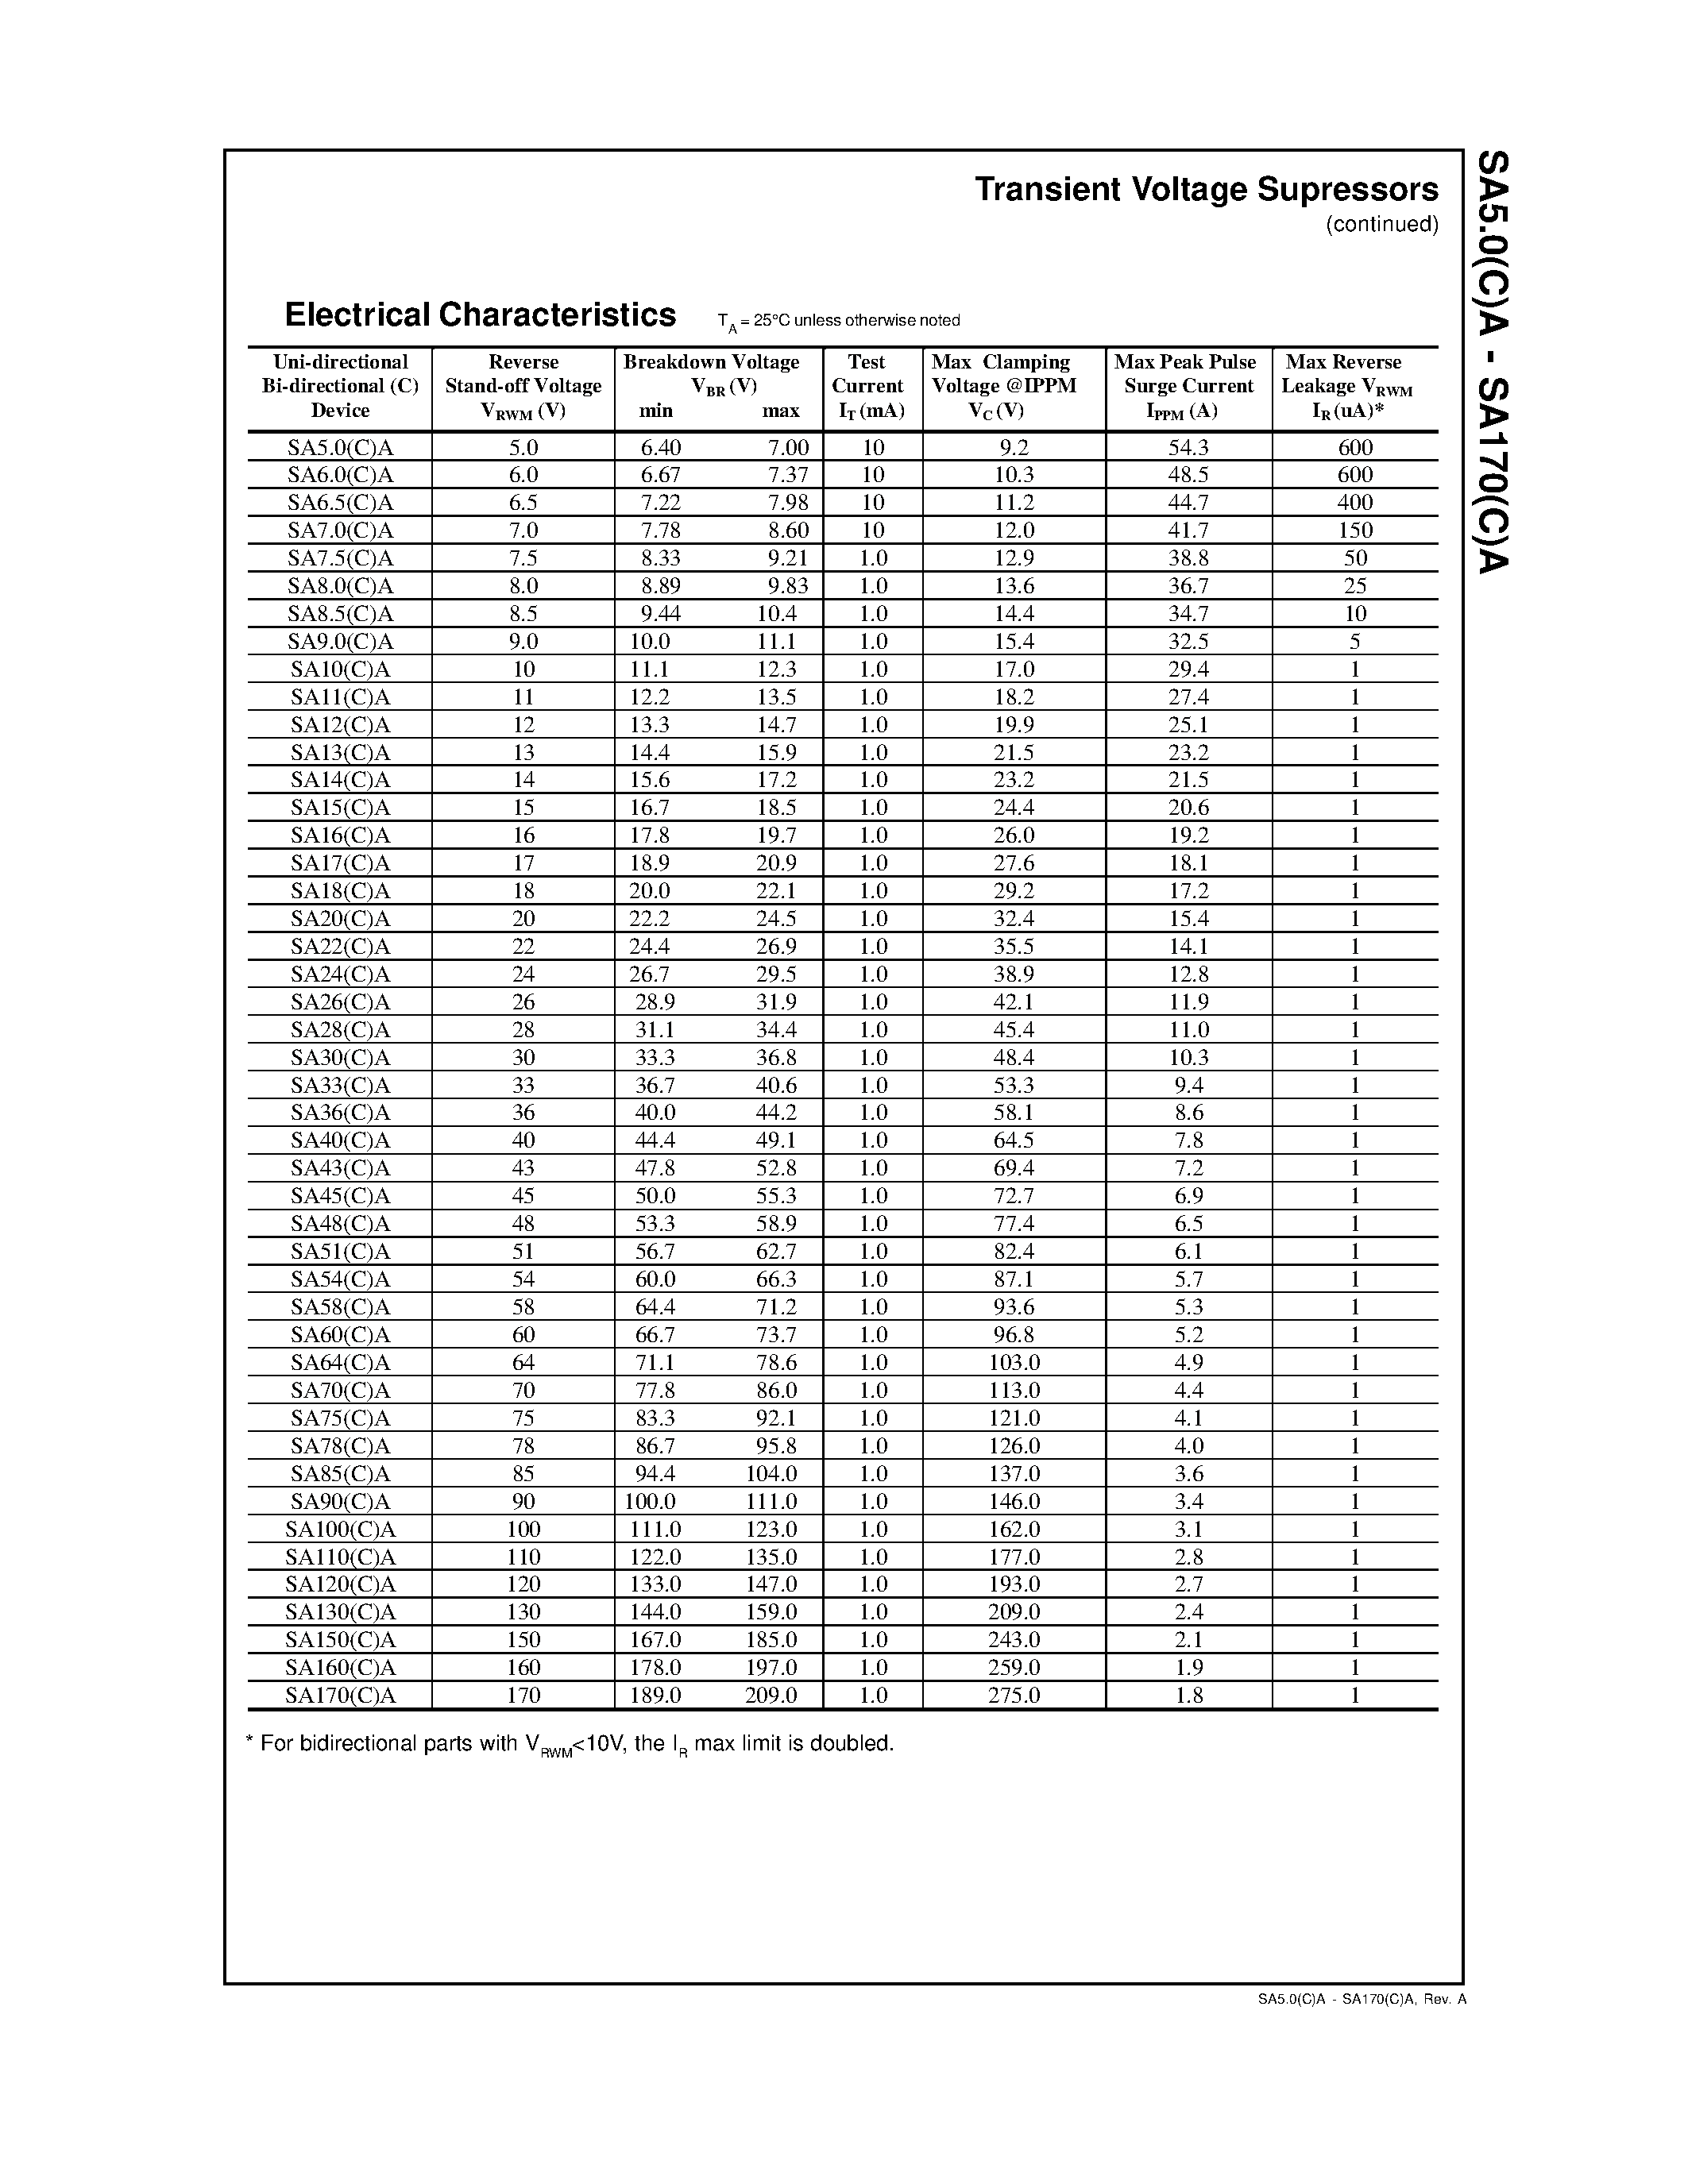 Datasheet SA20(C)A - DEVICES FOR BIPOLAR APPLICATIONS page 2